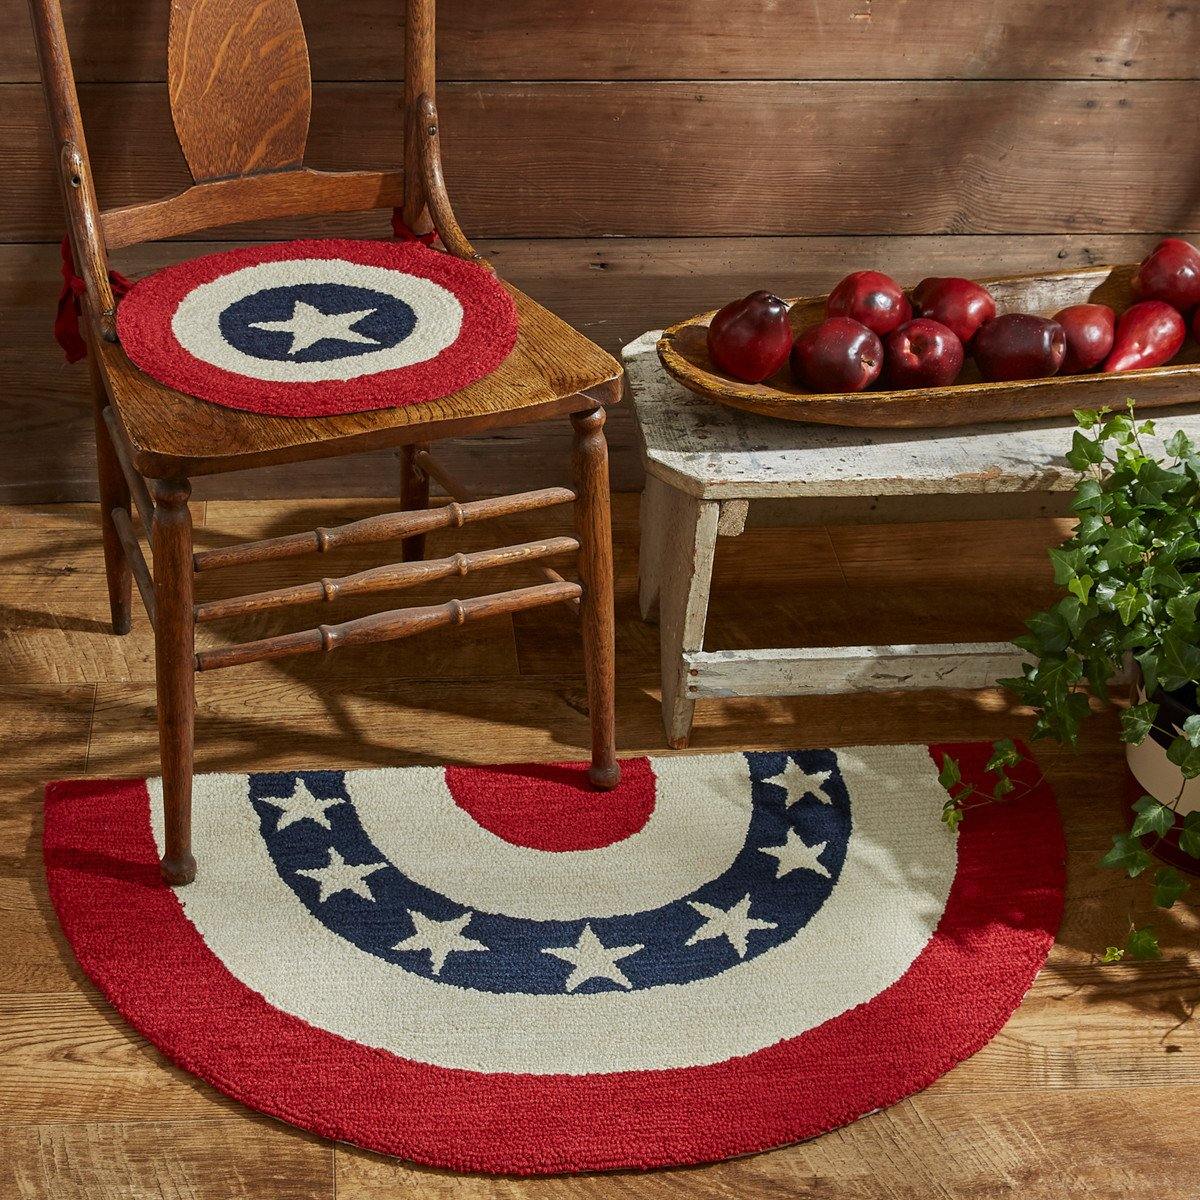 Americana Star Hooked Chairpad Park Designs - The Fox Decor